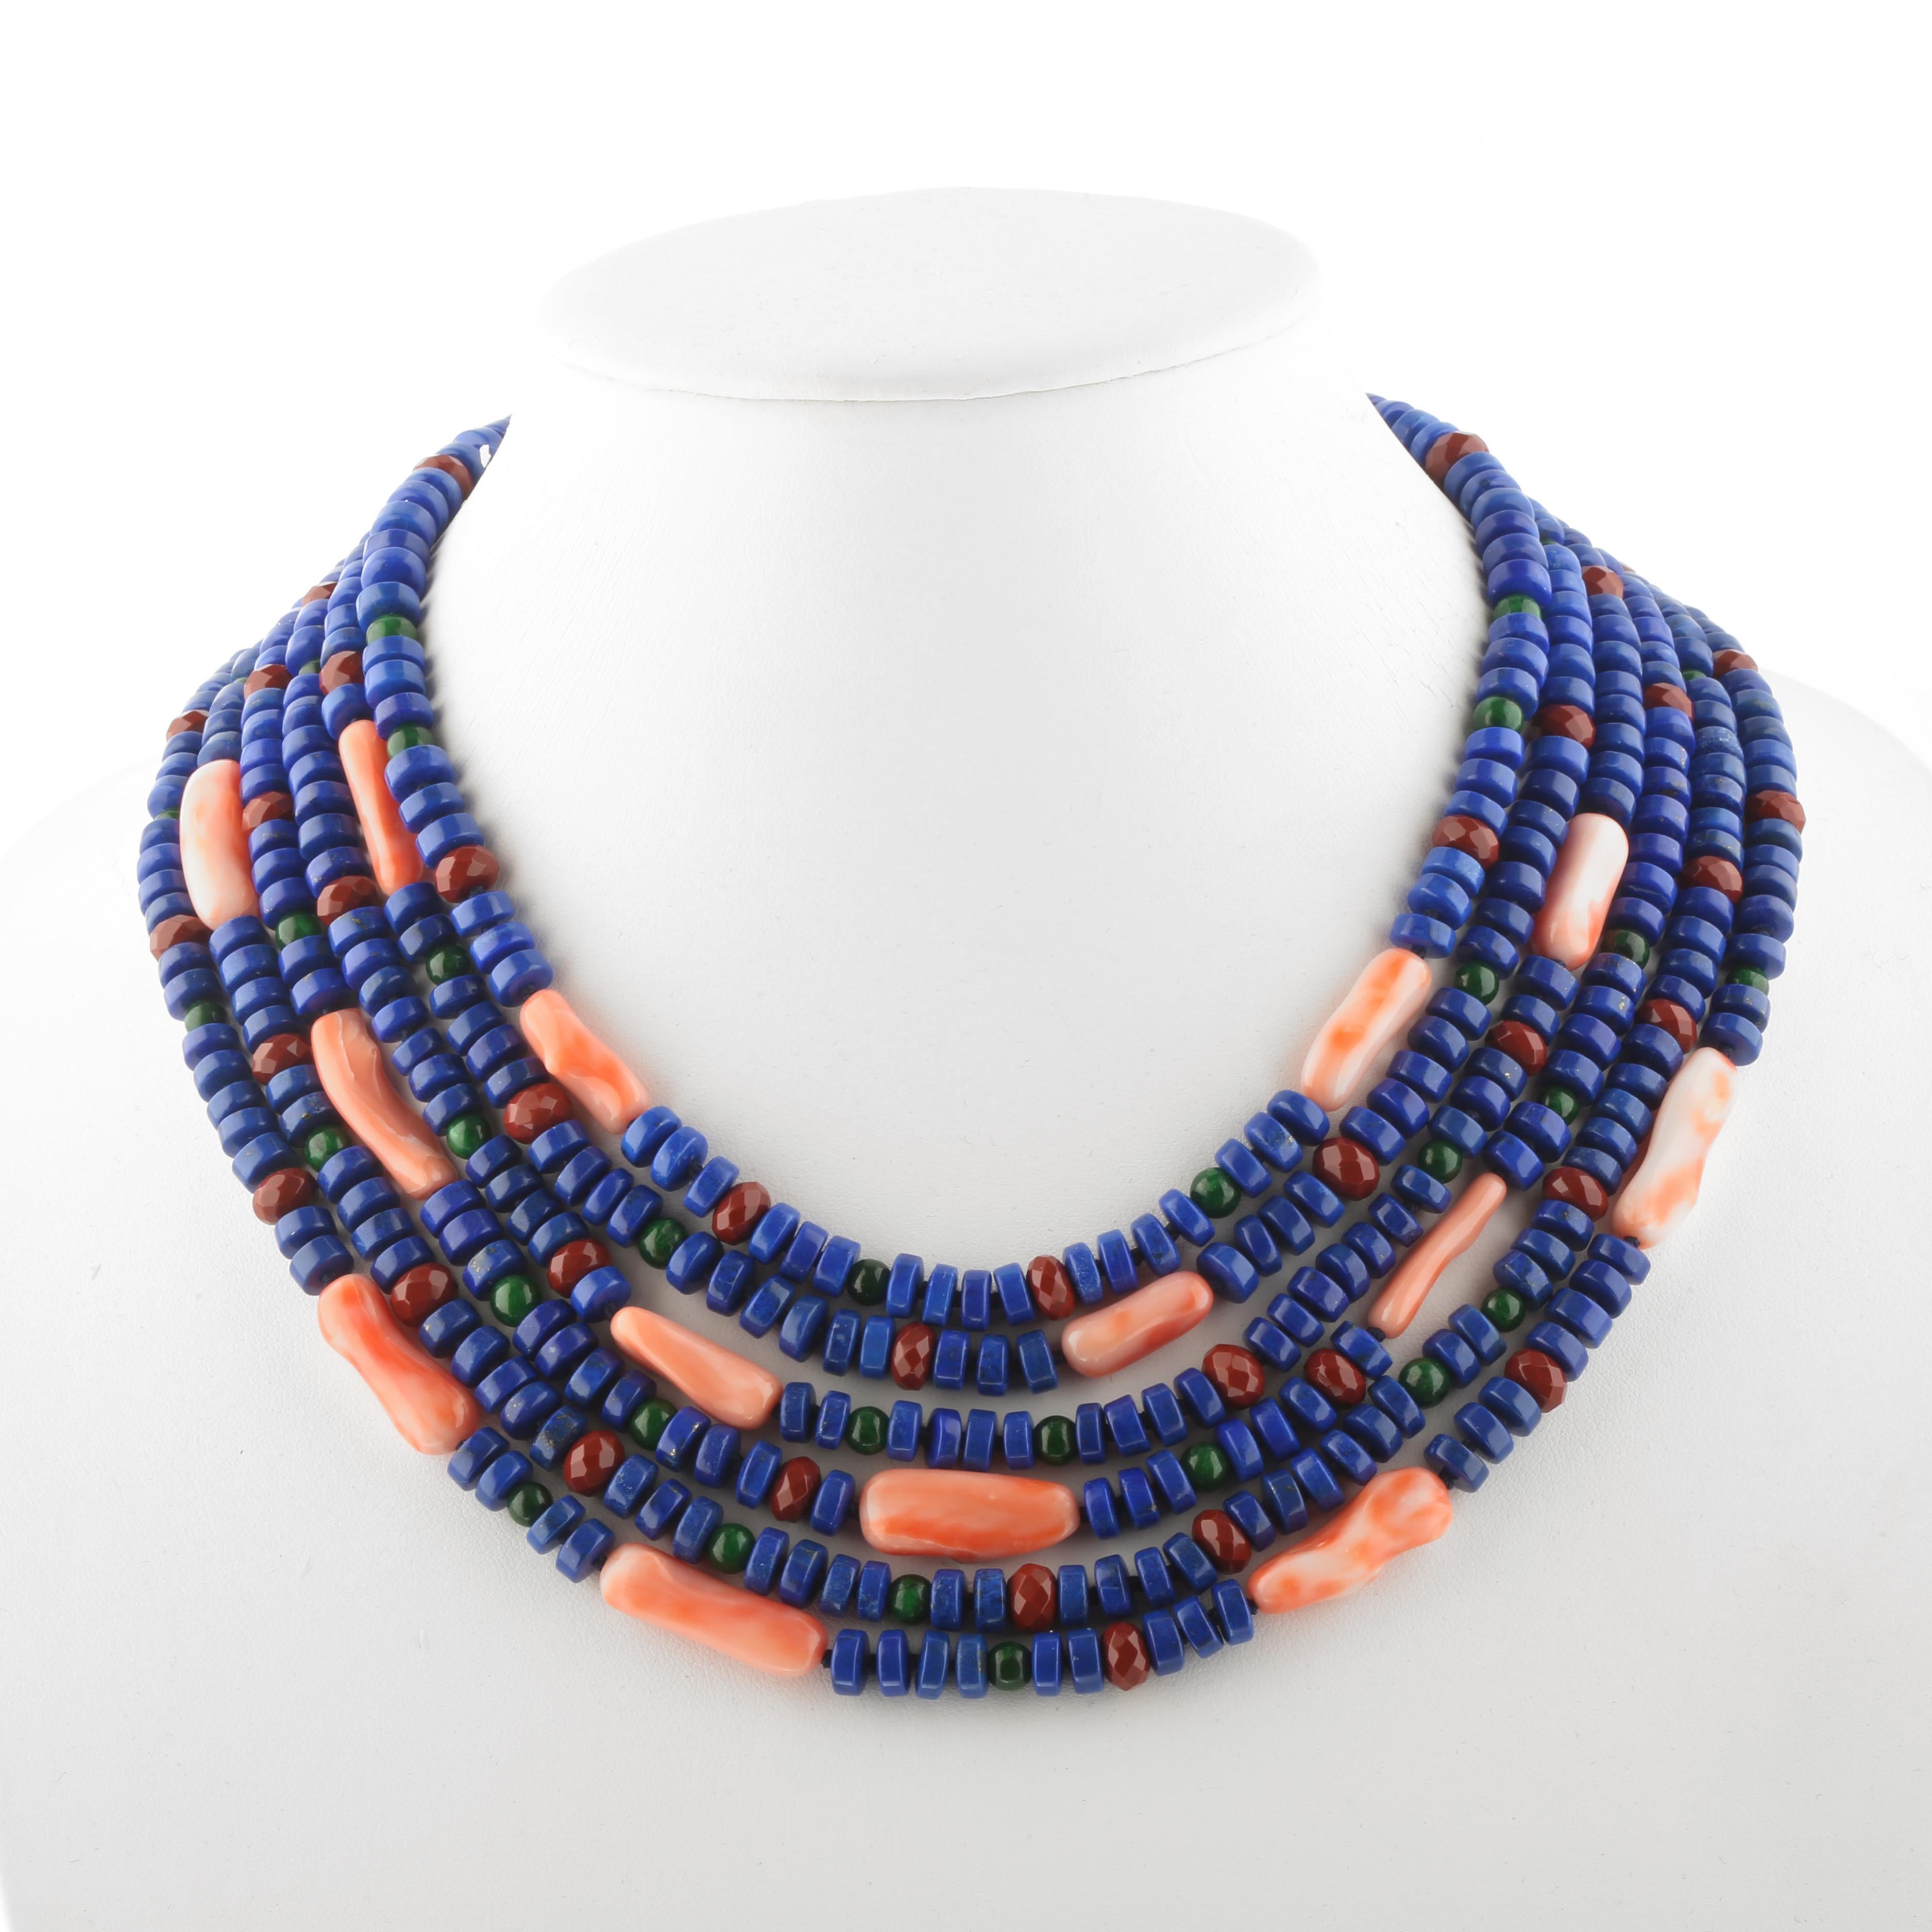 Inspired by the treasures of ancient Europe, this summer vibe necklace is made with natural precious stones.

• Gilded silver closure
• Lapis, Pink Coral, Red Jasper
• Total number of strands 6
• Total length 45 cm
• Total weight 249 g

At Intini